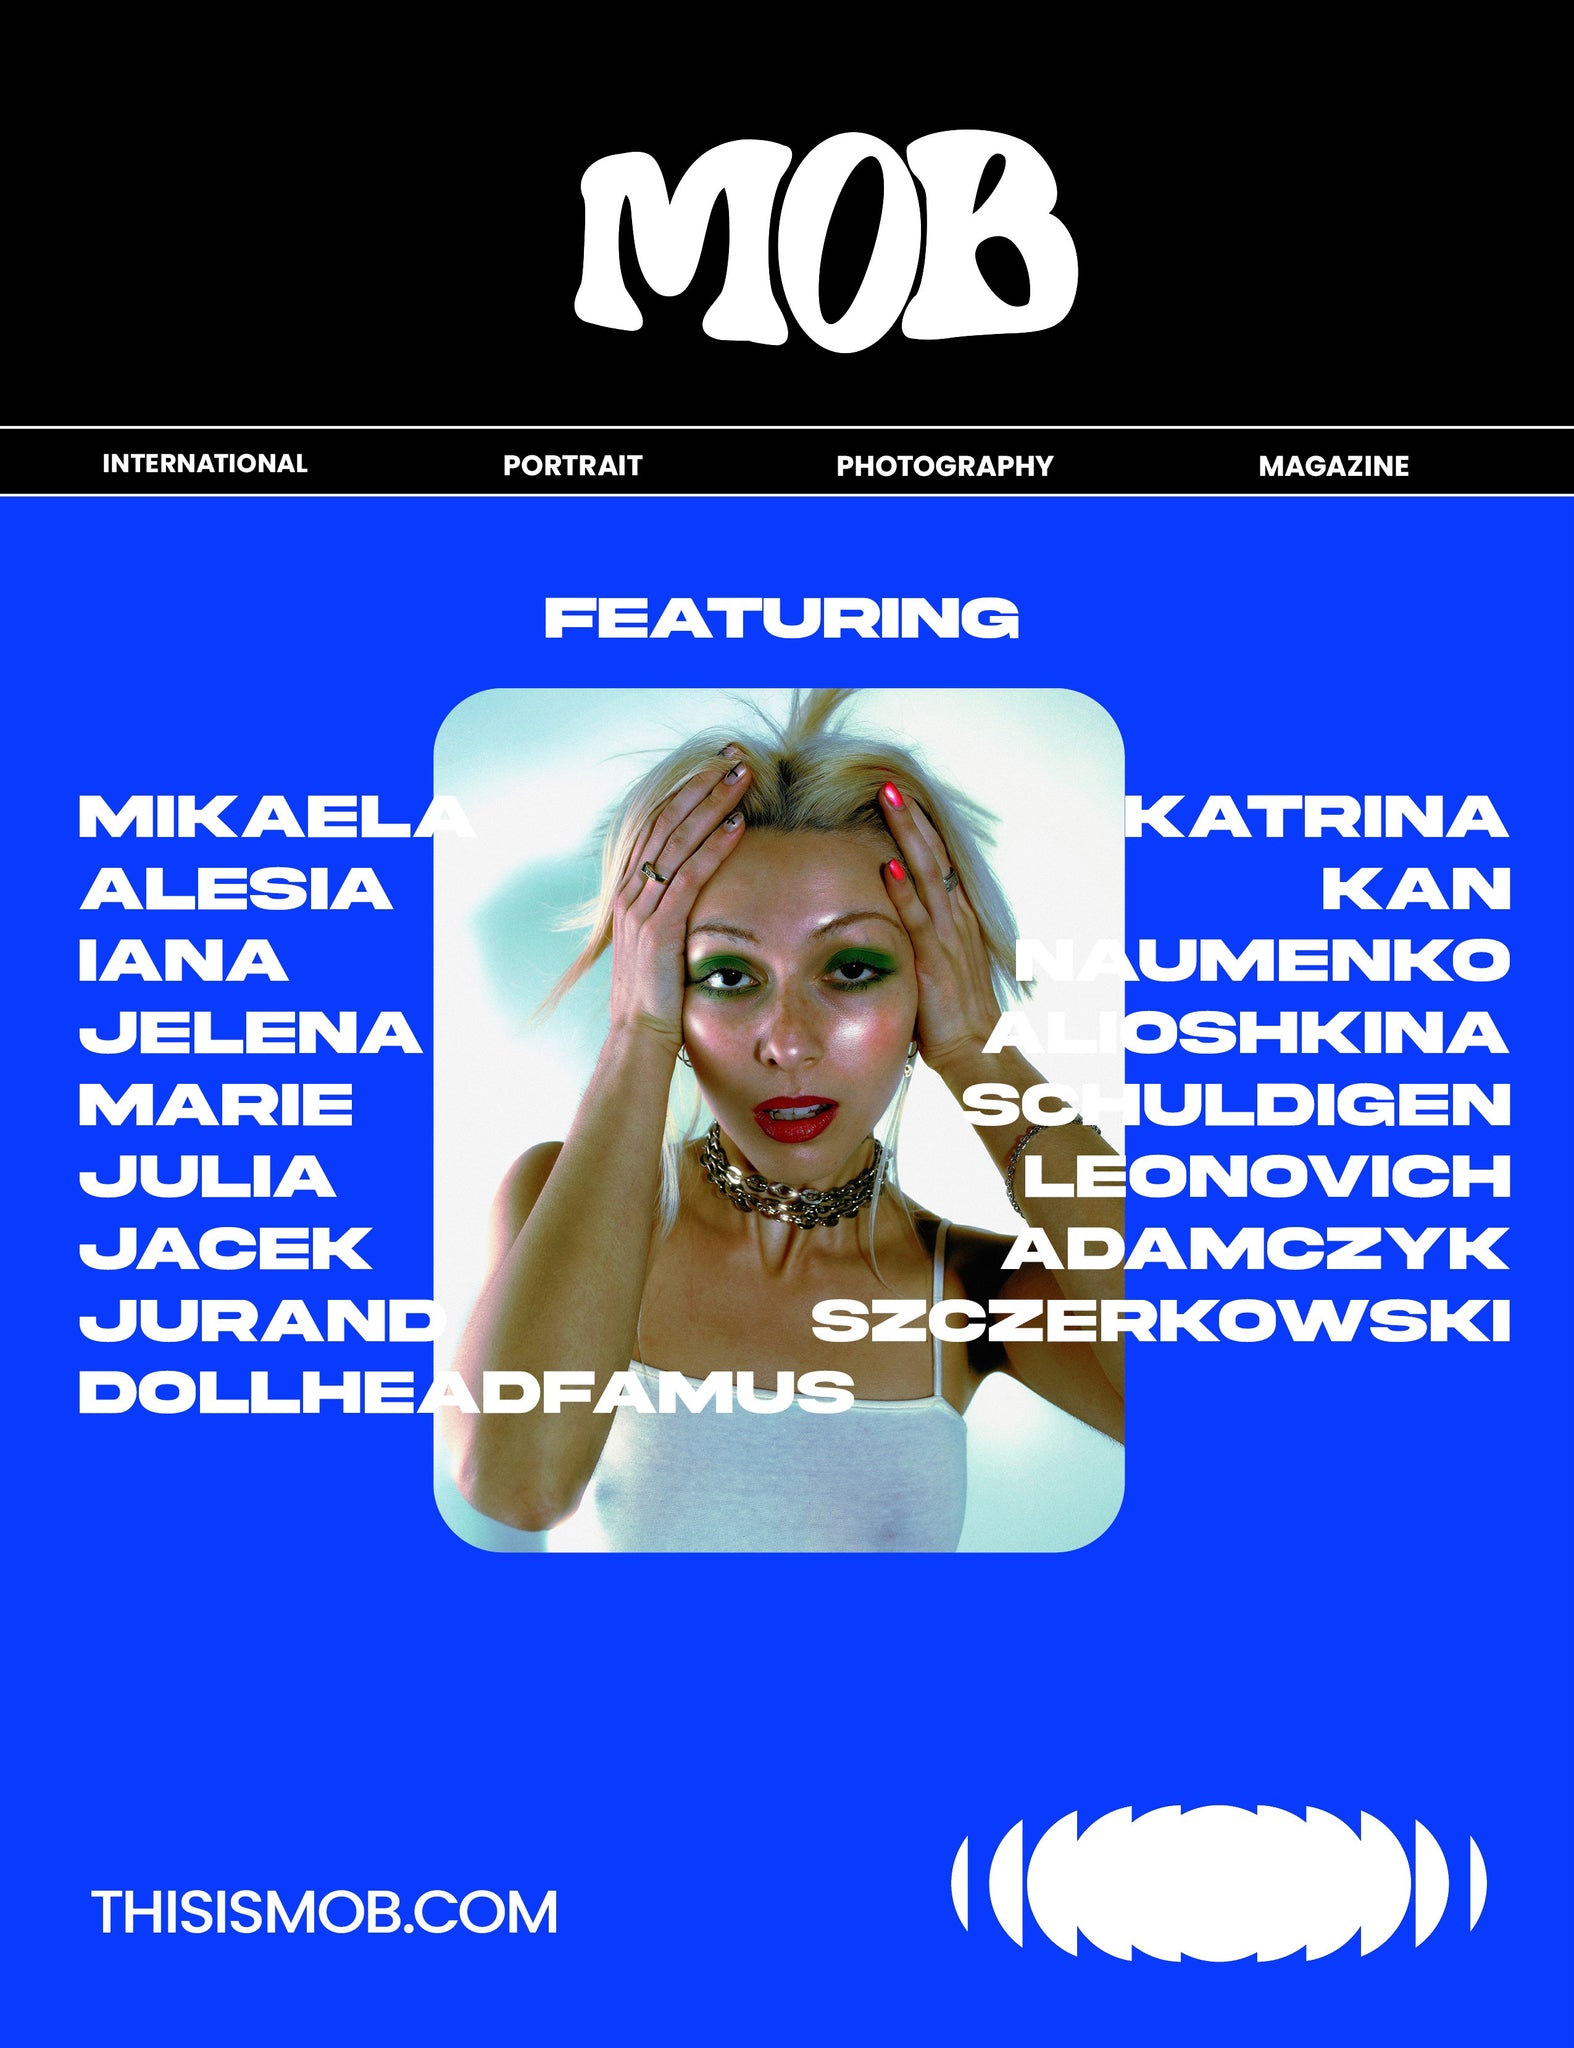 MOB JOURNAL | VOLUME THIRTY | ISSUE #09